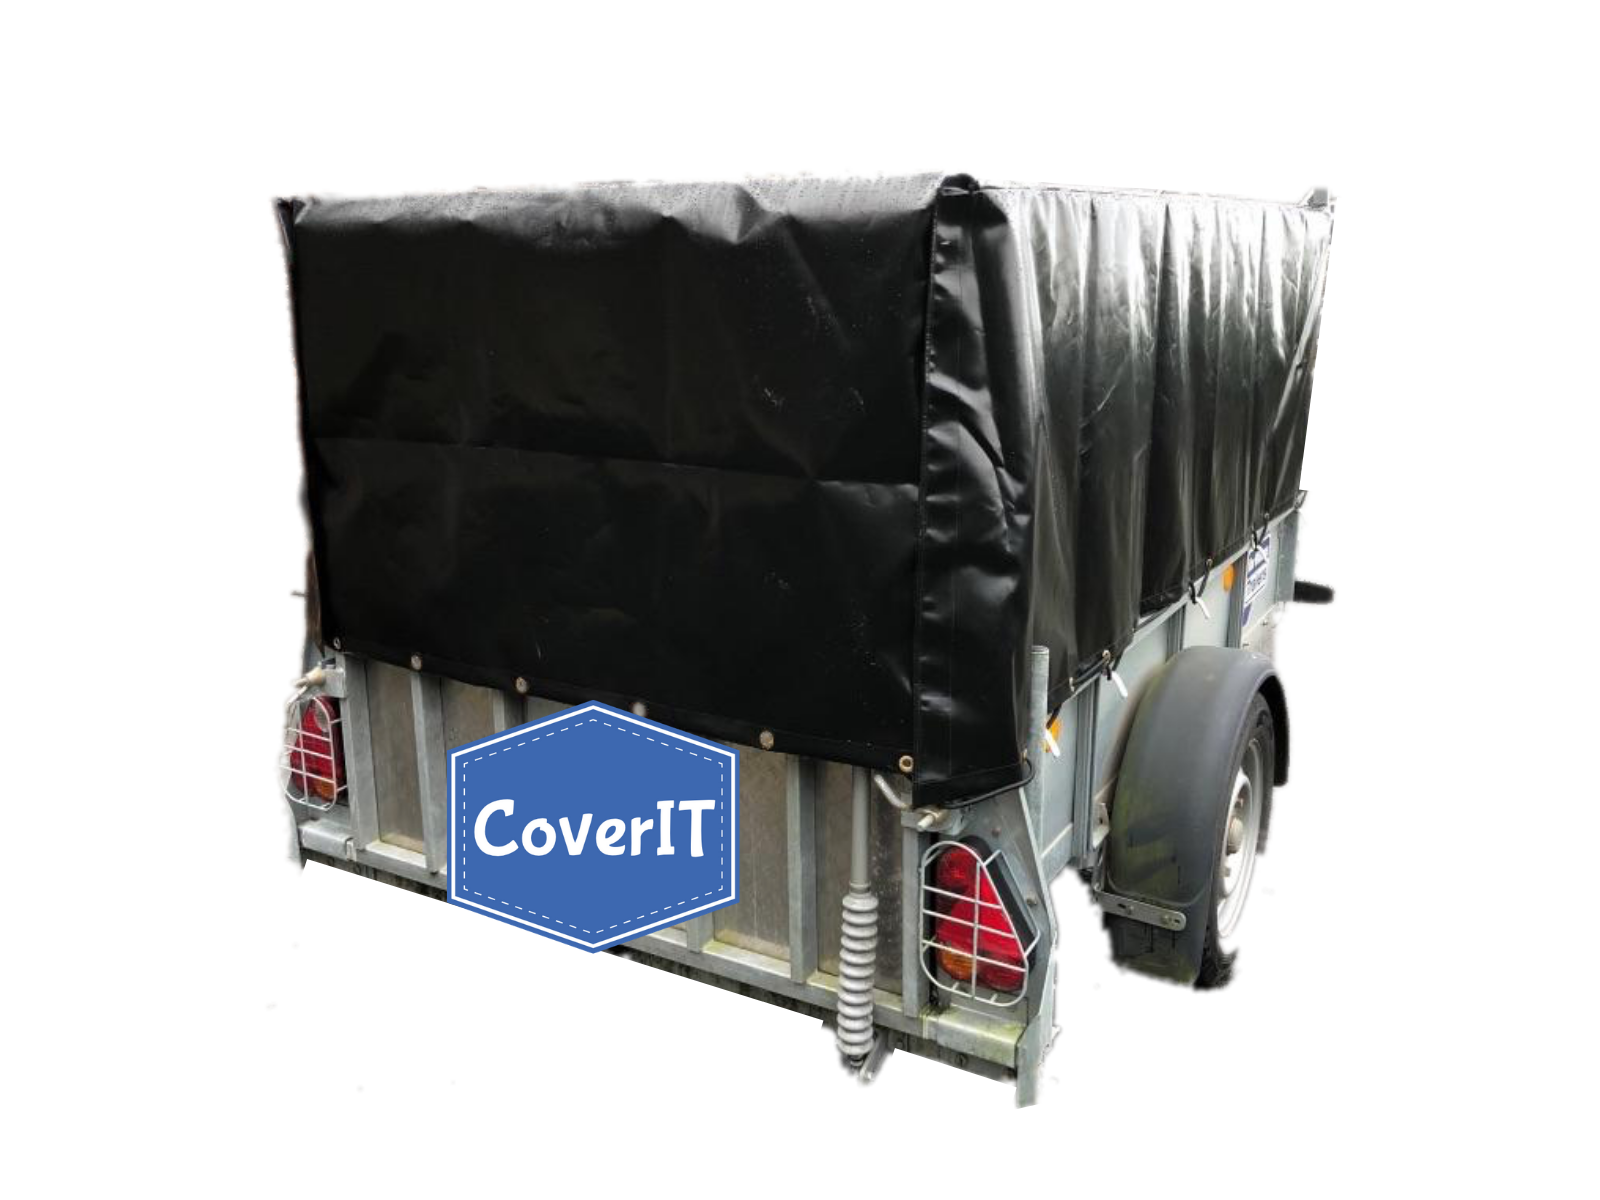 Standard GD64-201 x 135cm coverandcarry Trailer Cover for The Ifor Williams 